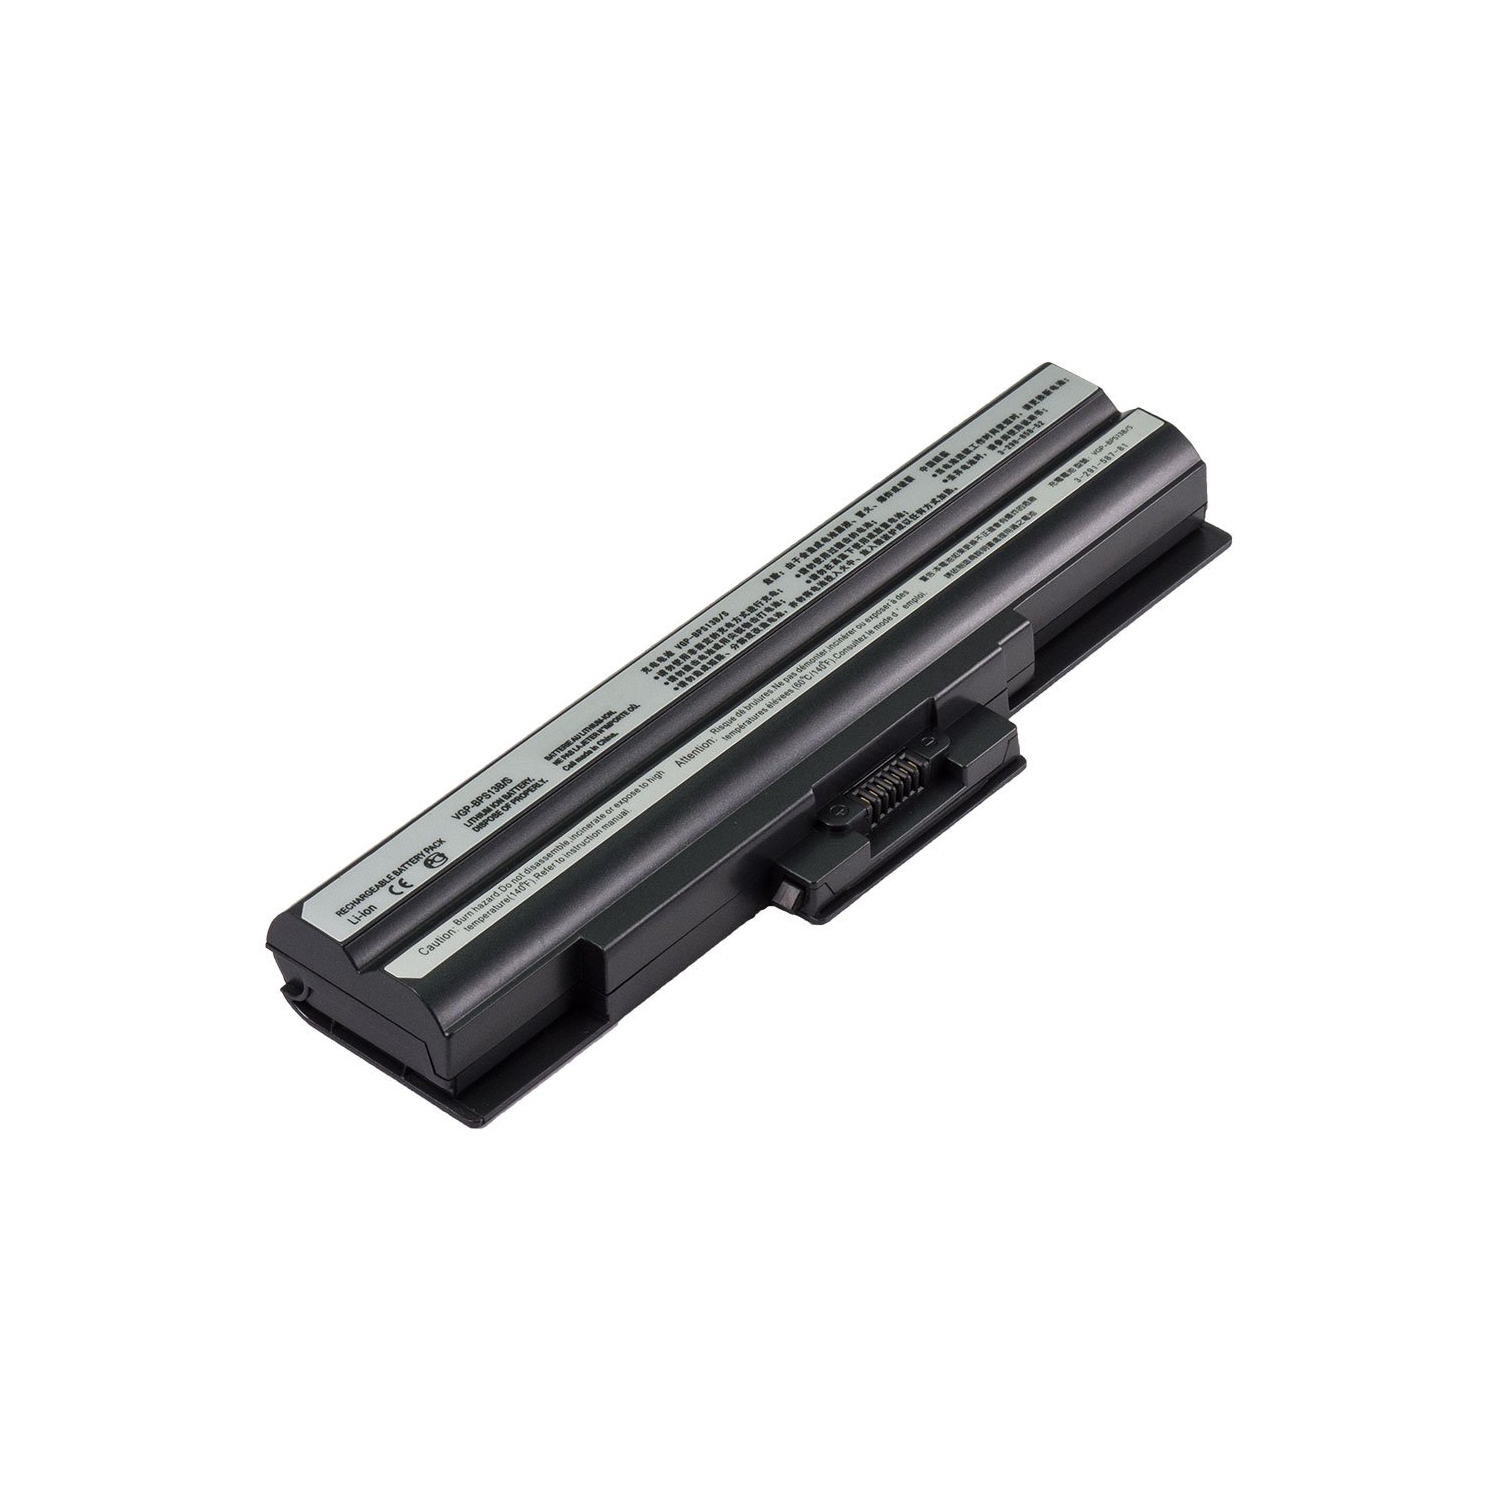 Laptop Battery Replacement for Sony VAIO VGN-NS120E/L, VGP-BPL13, VGP-BPS13/Q, VGP-BPS13A/B, VGP-BPS13A/S, VGP-BPS13A